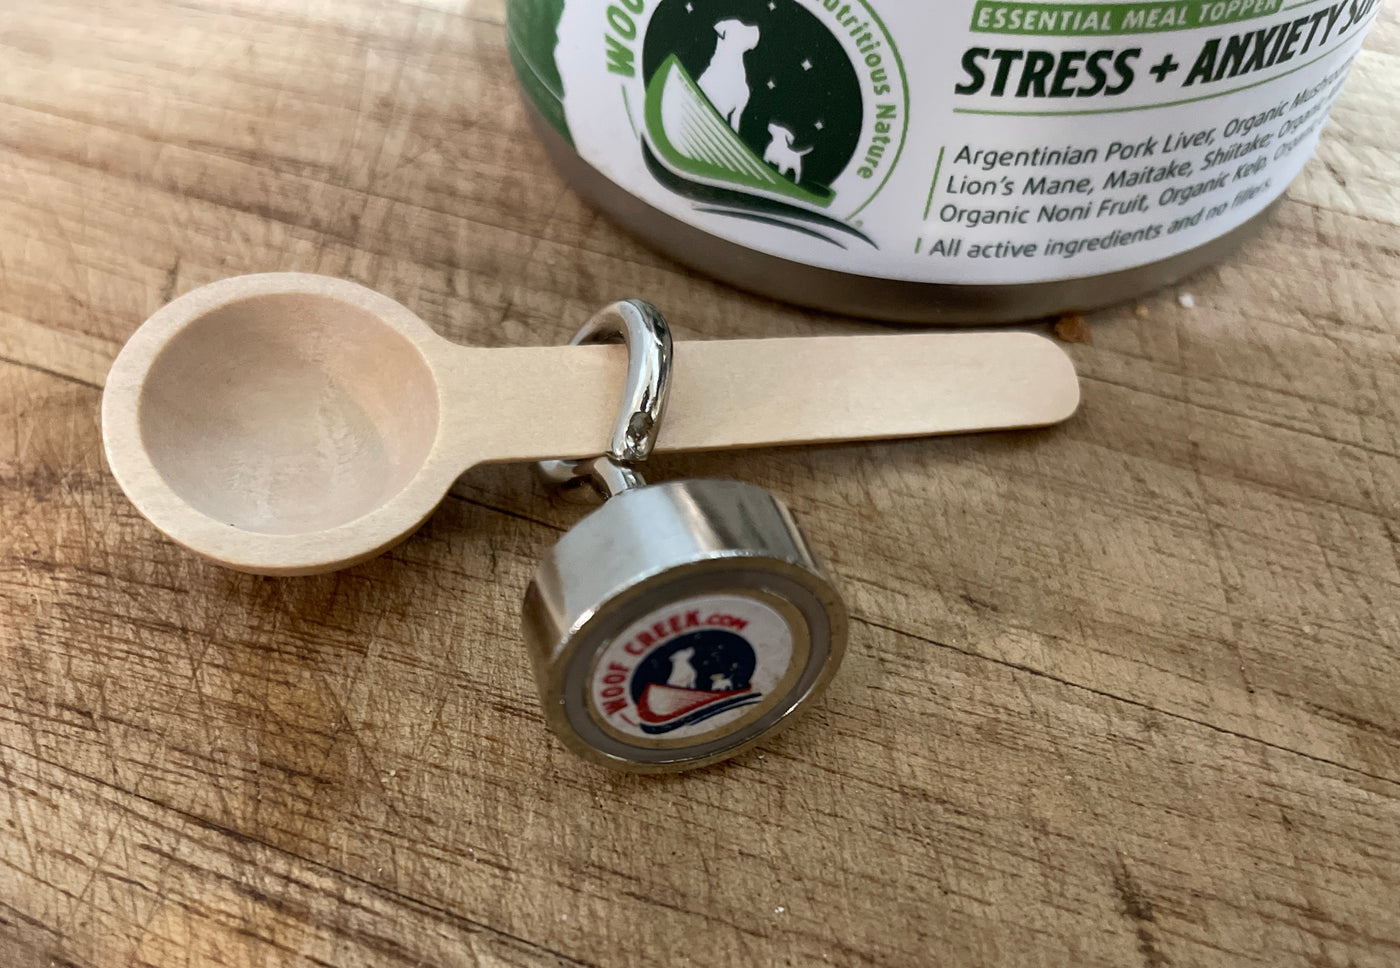 Magnetic Spoon Holder for Dosage Spoon of Essential Powder Toppers - Woof Creek Dog Wellness